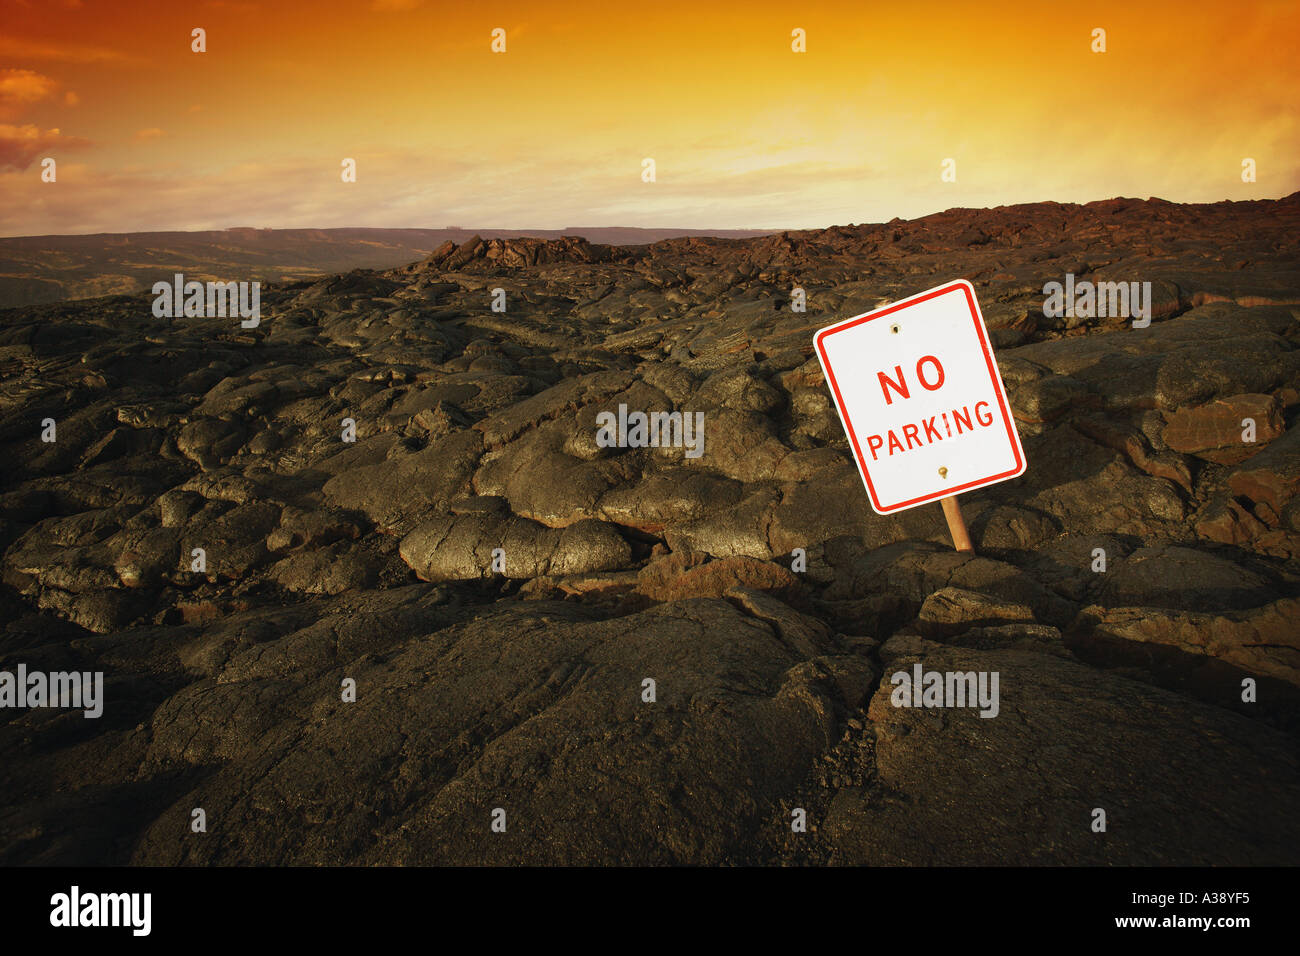 No parking sign on volcanic rock Stock Photo